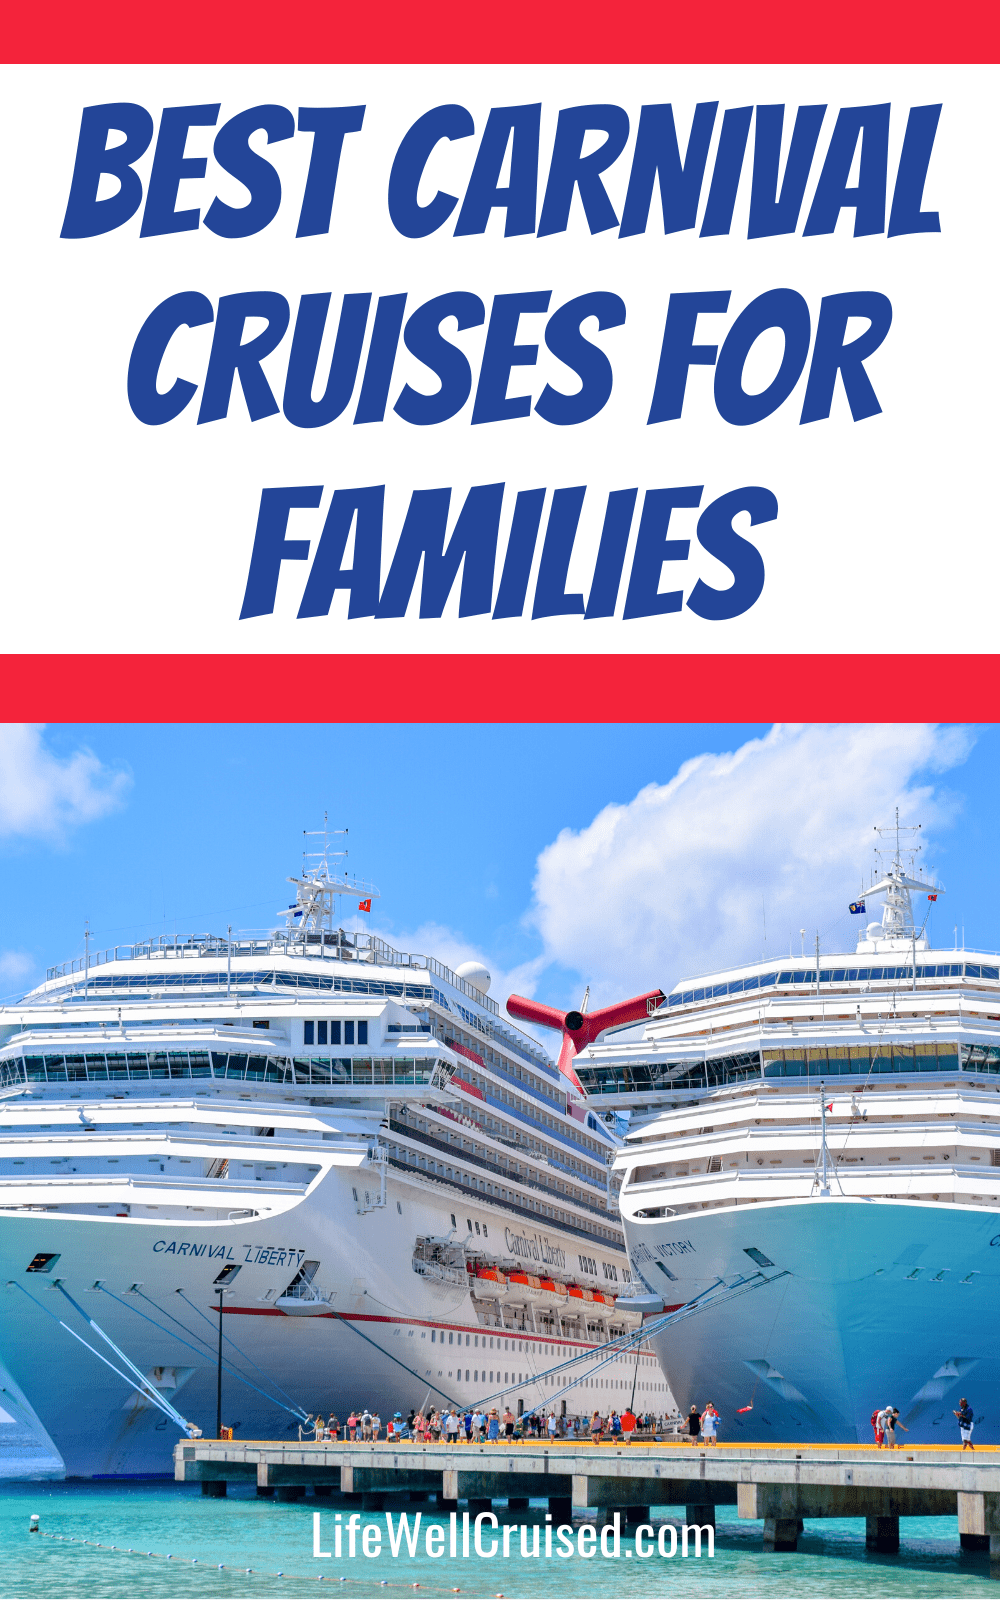 Best Carnival Cruises for Families